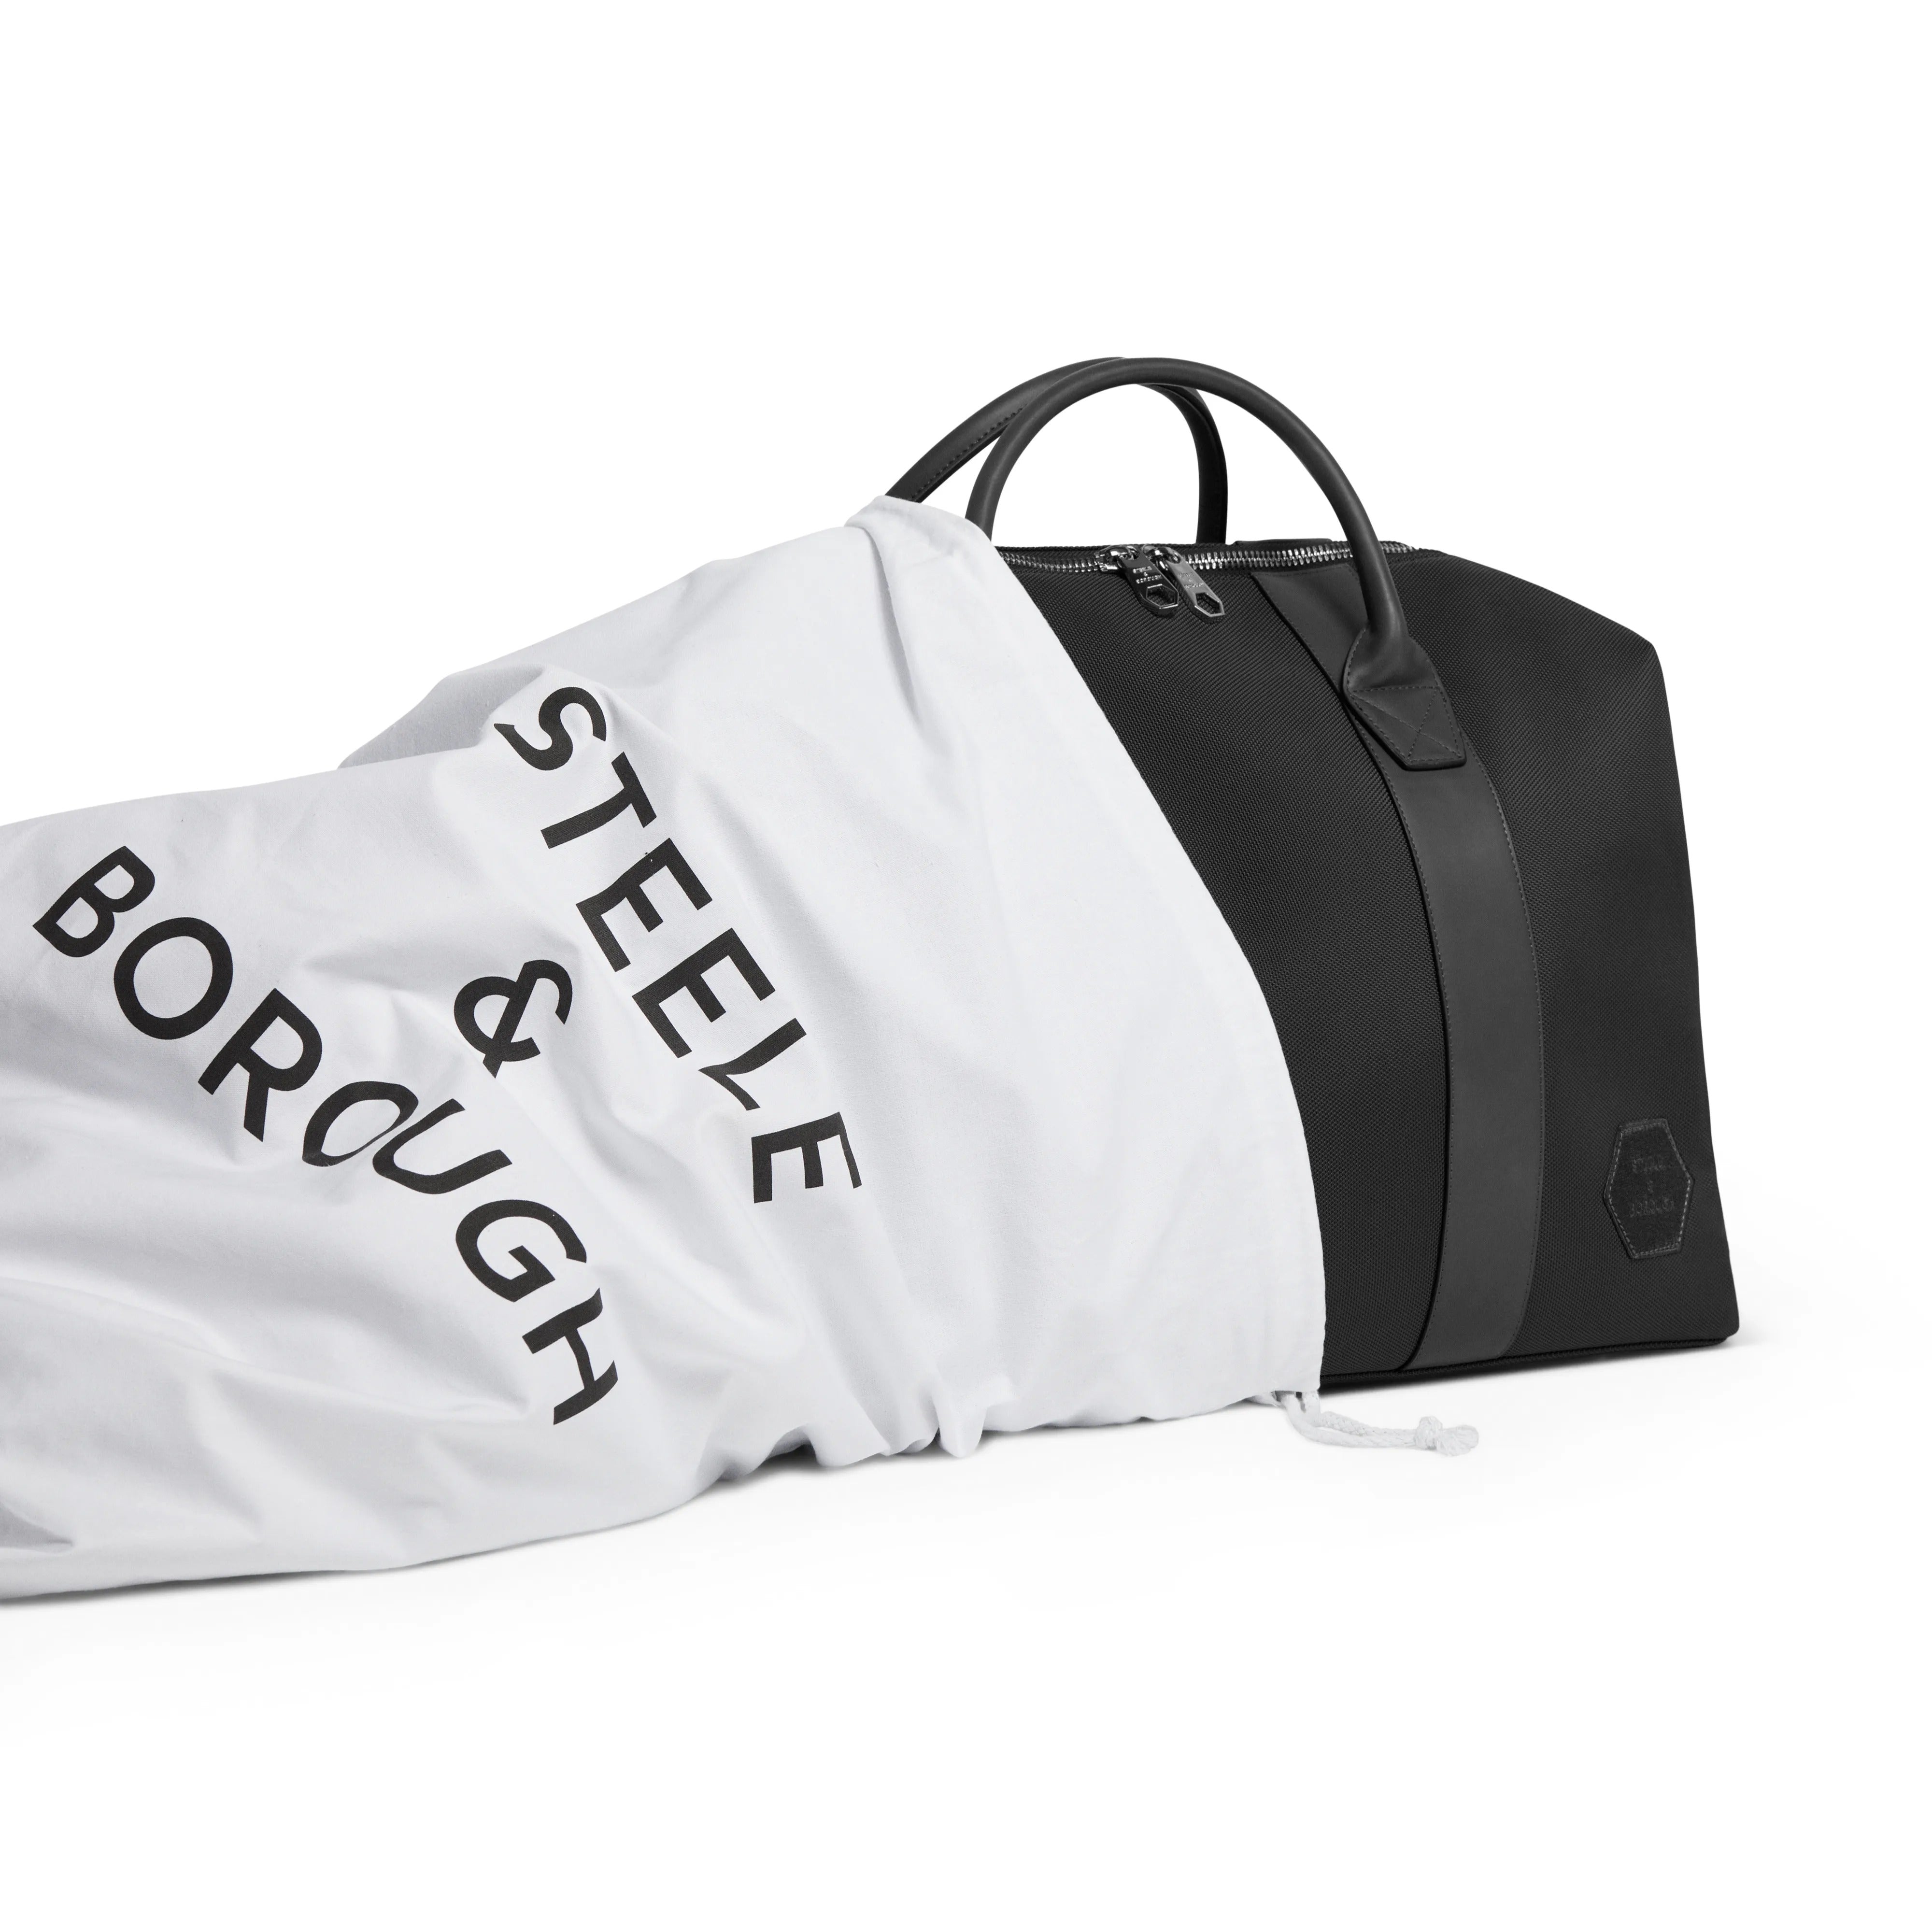 Black Weekend Bag paired with a chic white protective dust bag, showcasing the product's luxury and care instructions